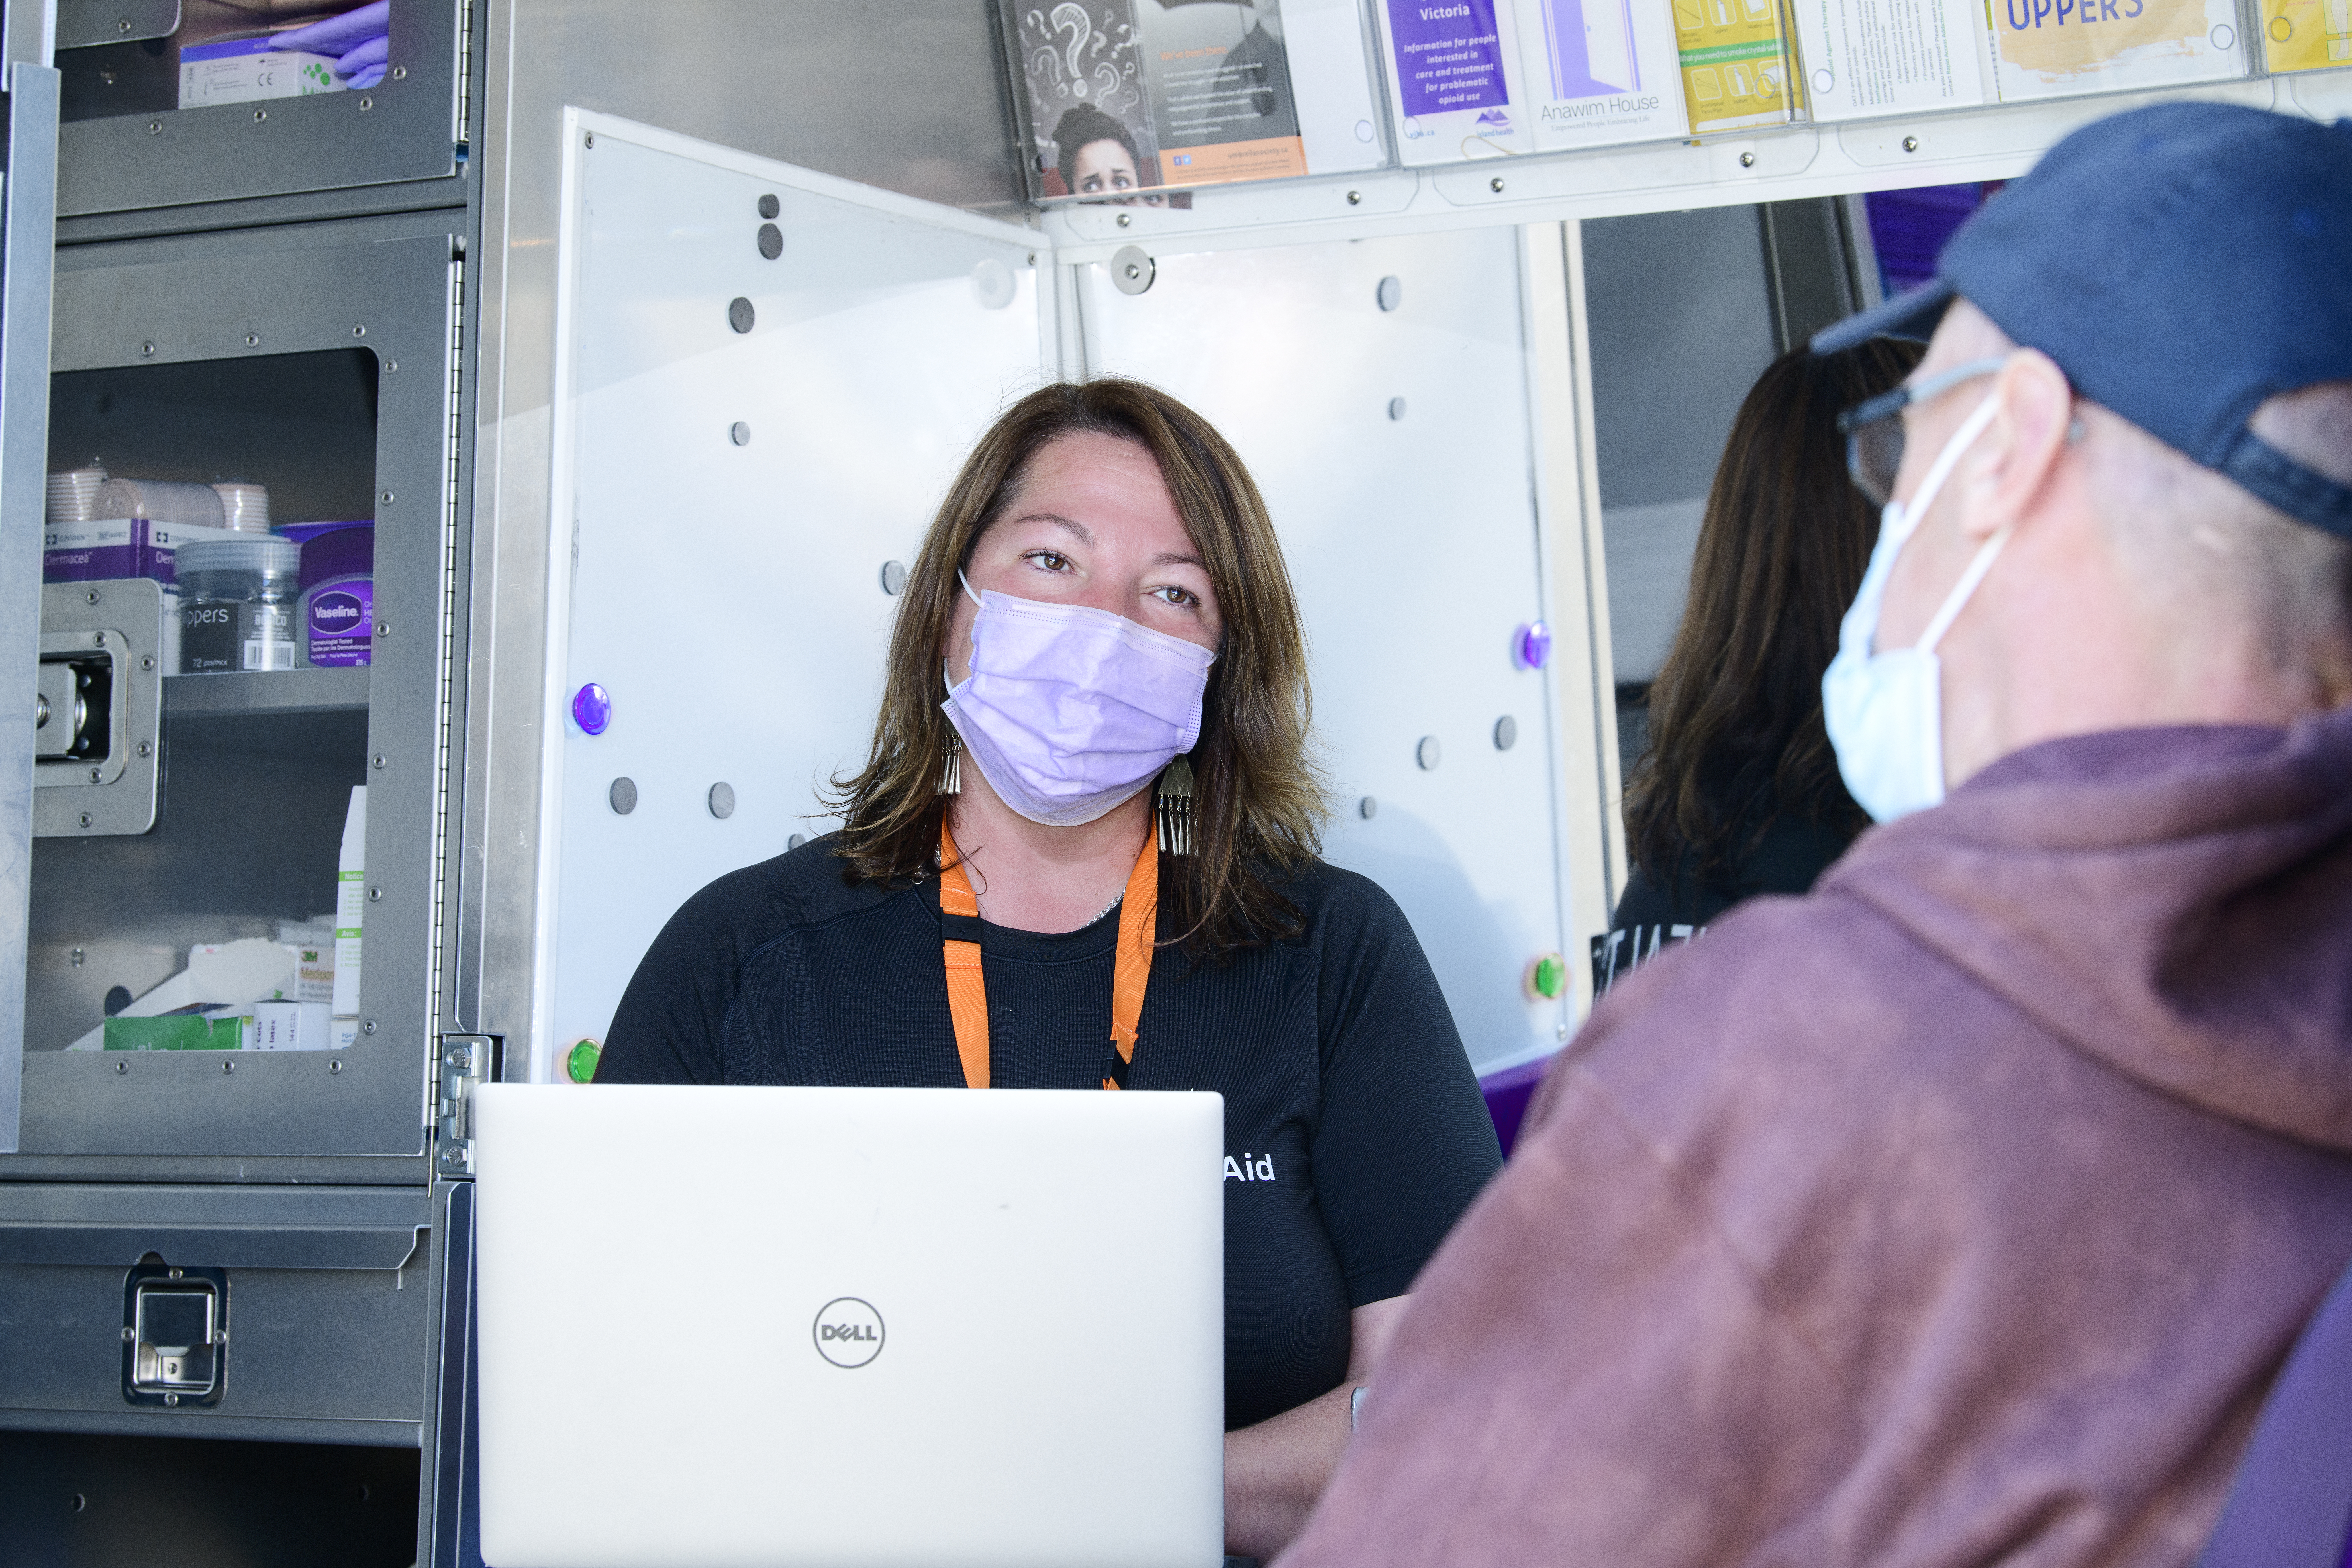 Candide Dias, Coordinator of Outreach Health Services at Cool Aid sitting in the Mobile Health Clinic van seeing a patient. Both Candide and the patient are wearing masks and Candide is on a laptop